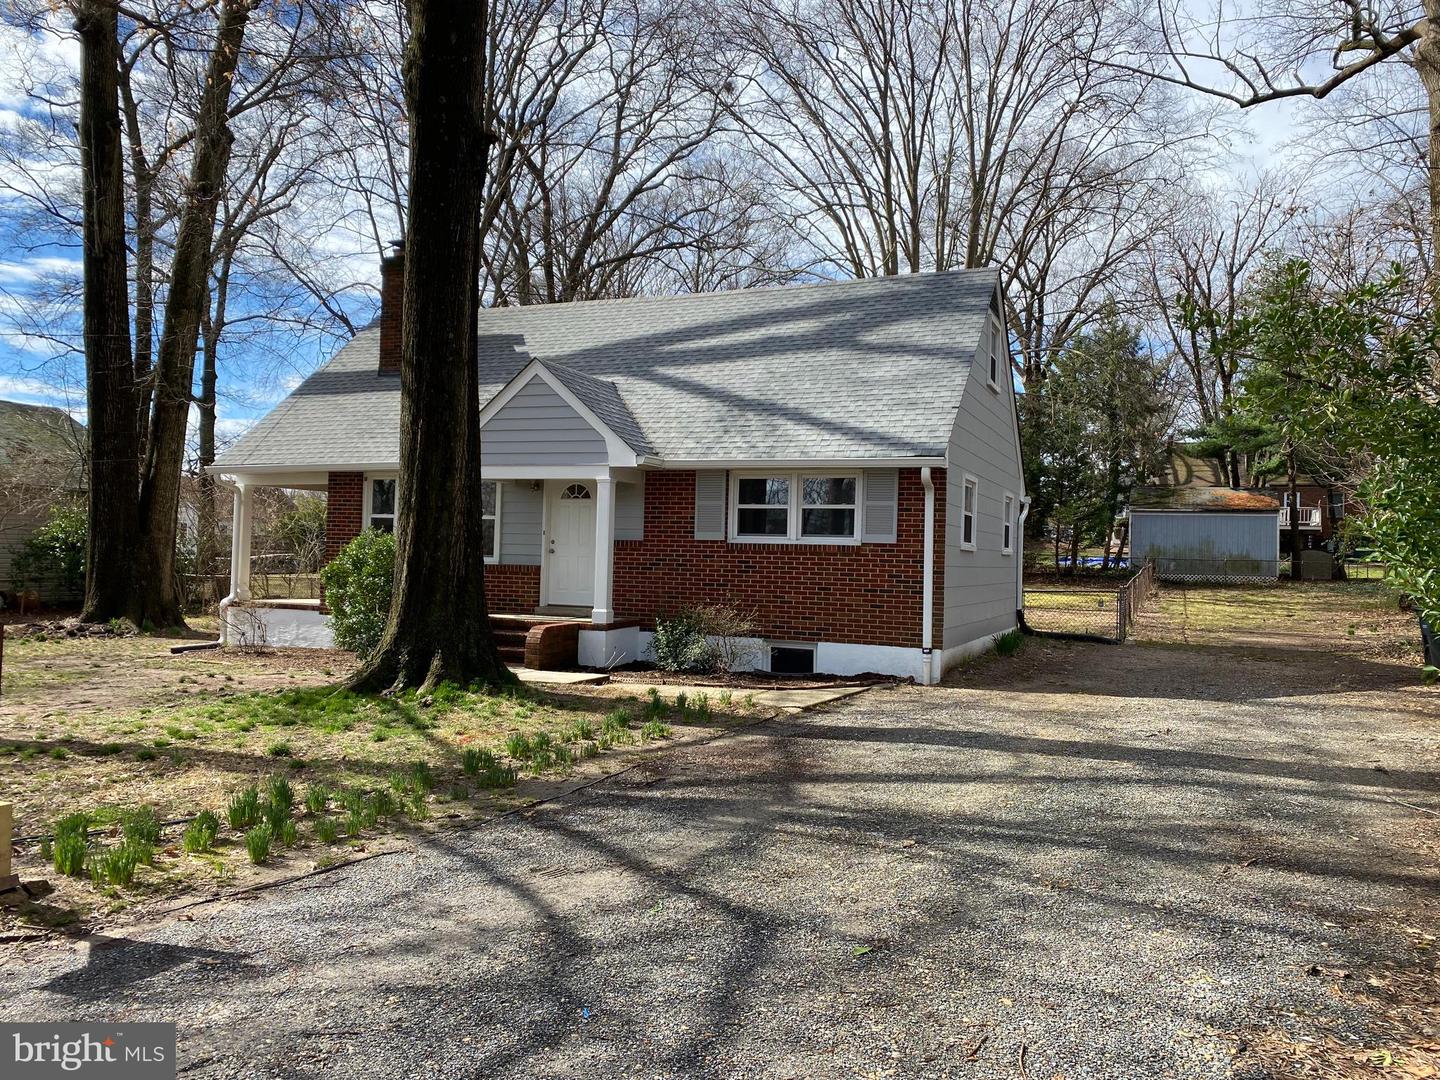 4611 Clementon Rd Property Image